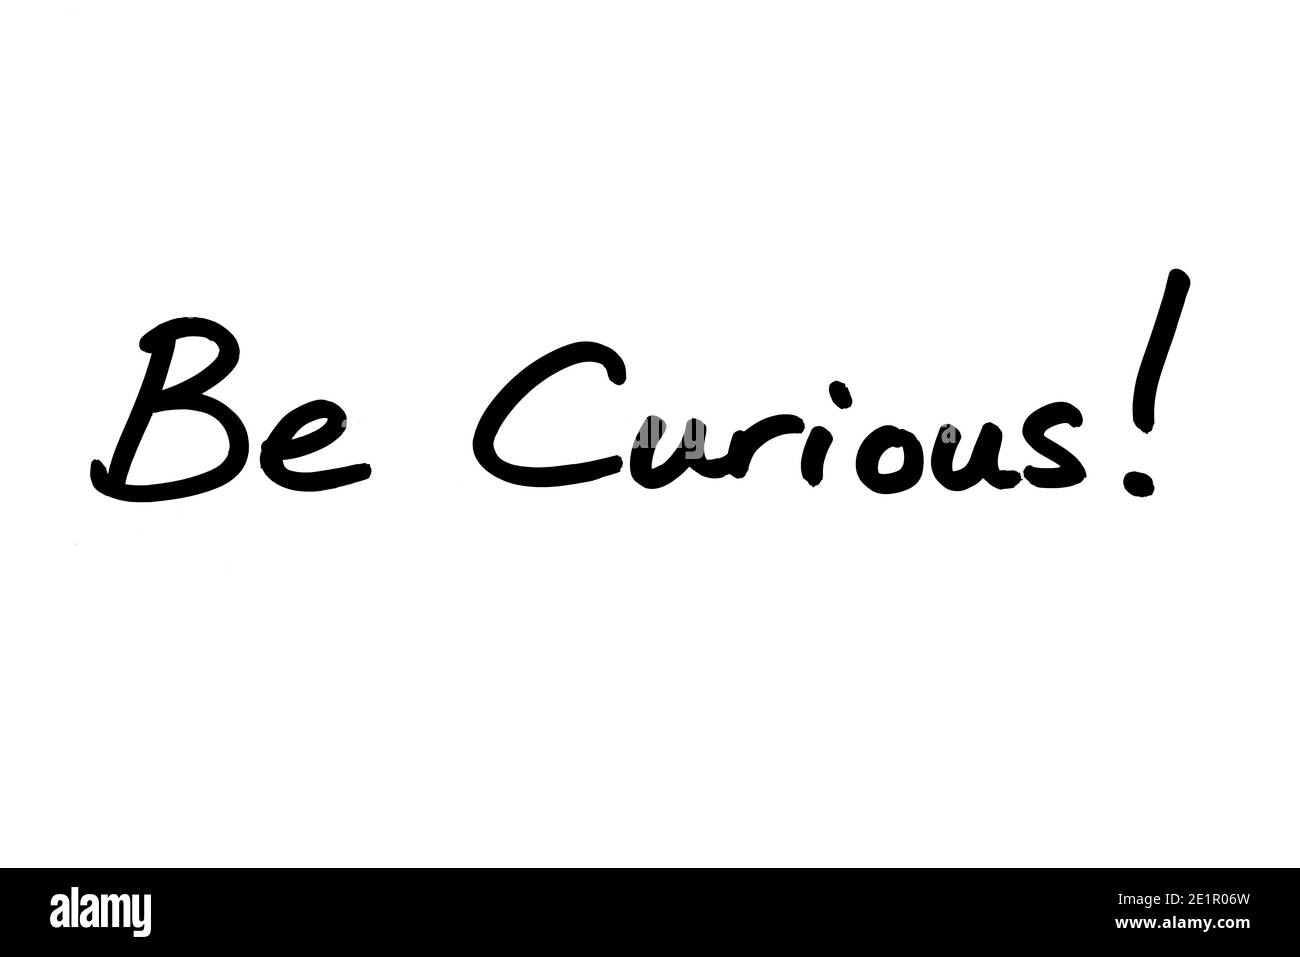 Be Curious! handwritten on a white background. Stock Photo